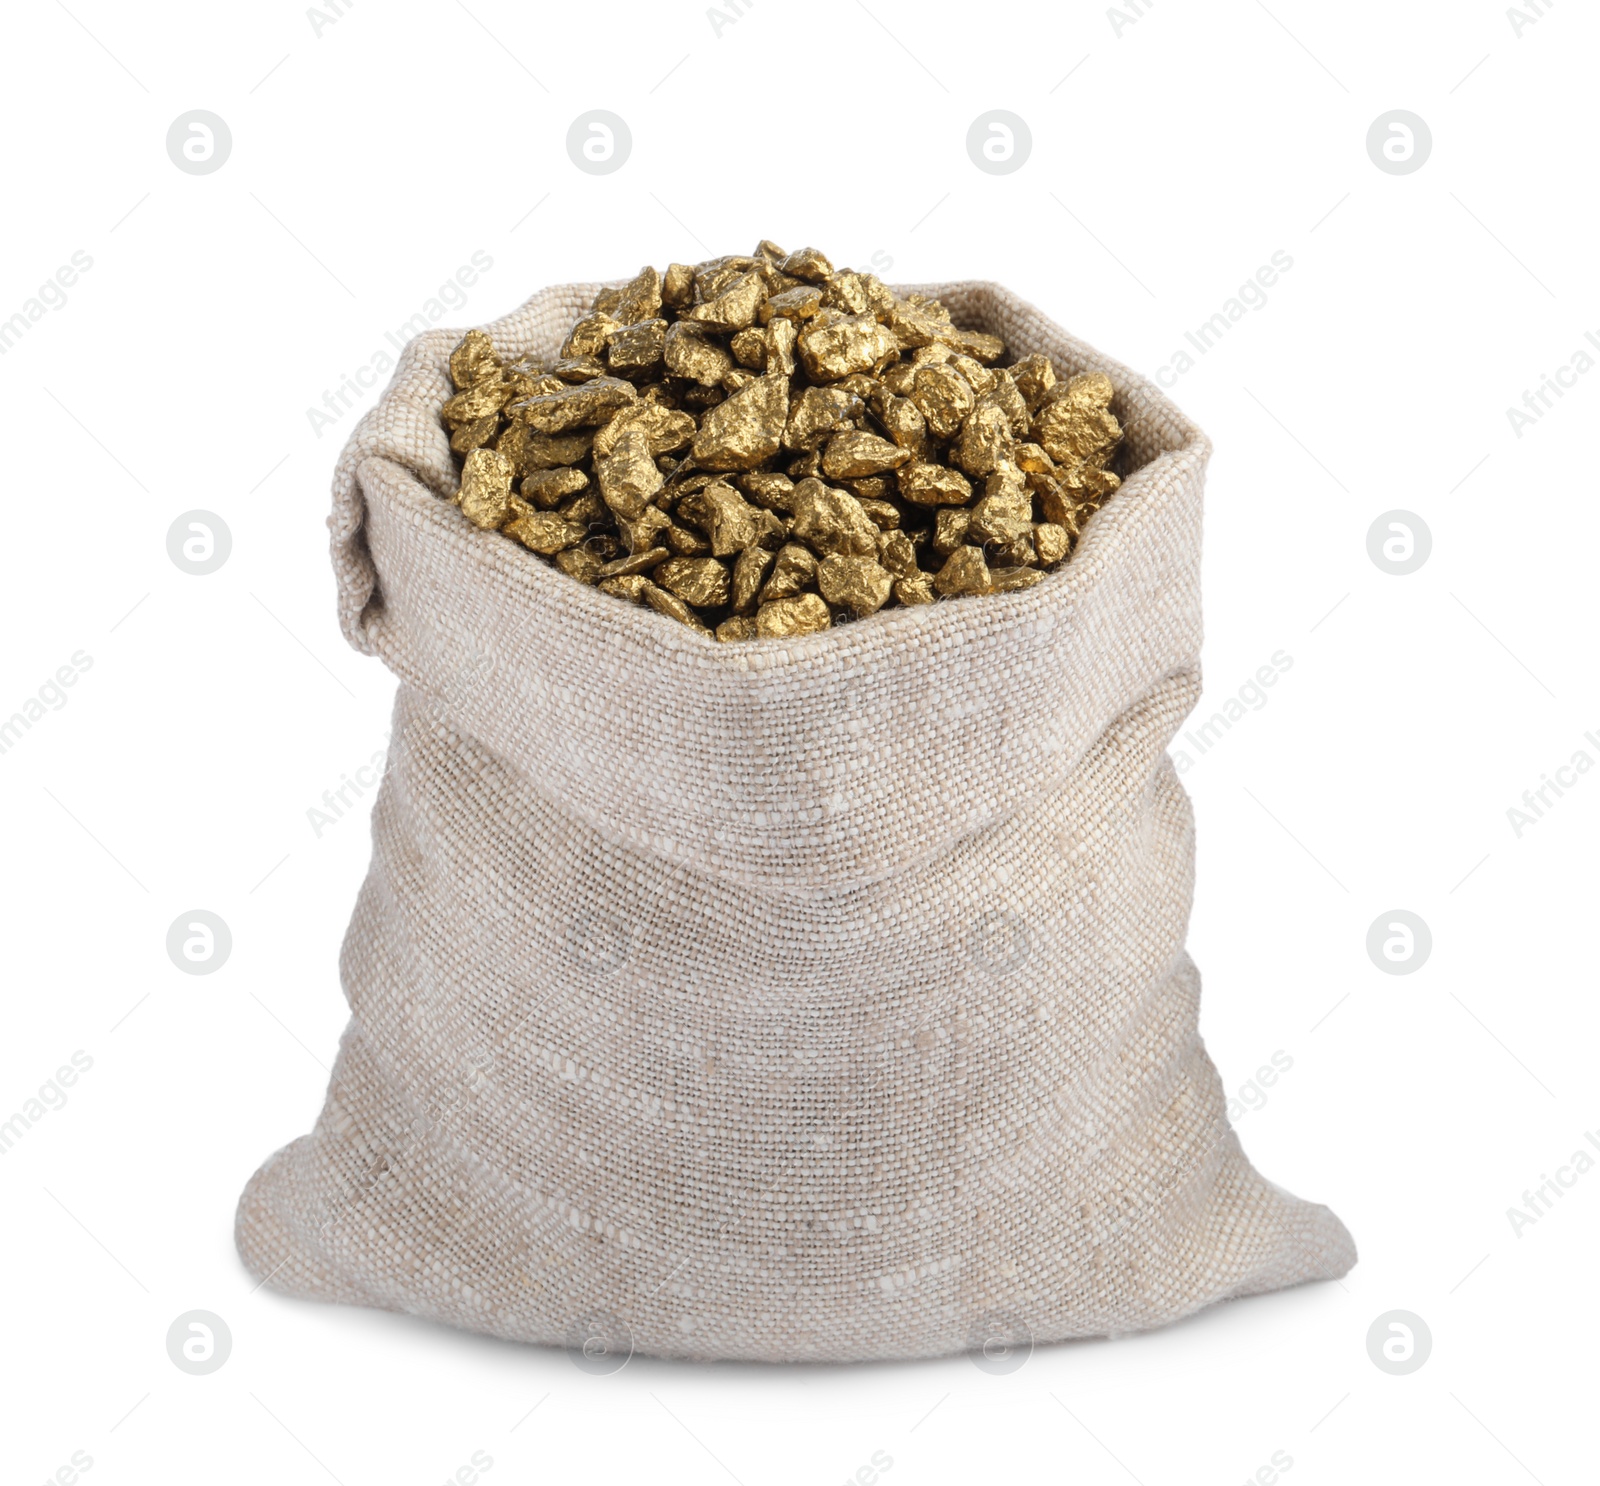 Photo of Sack of gold nuggets on white background